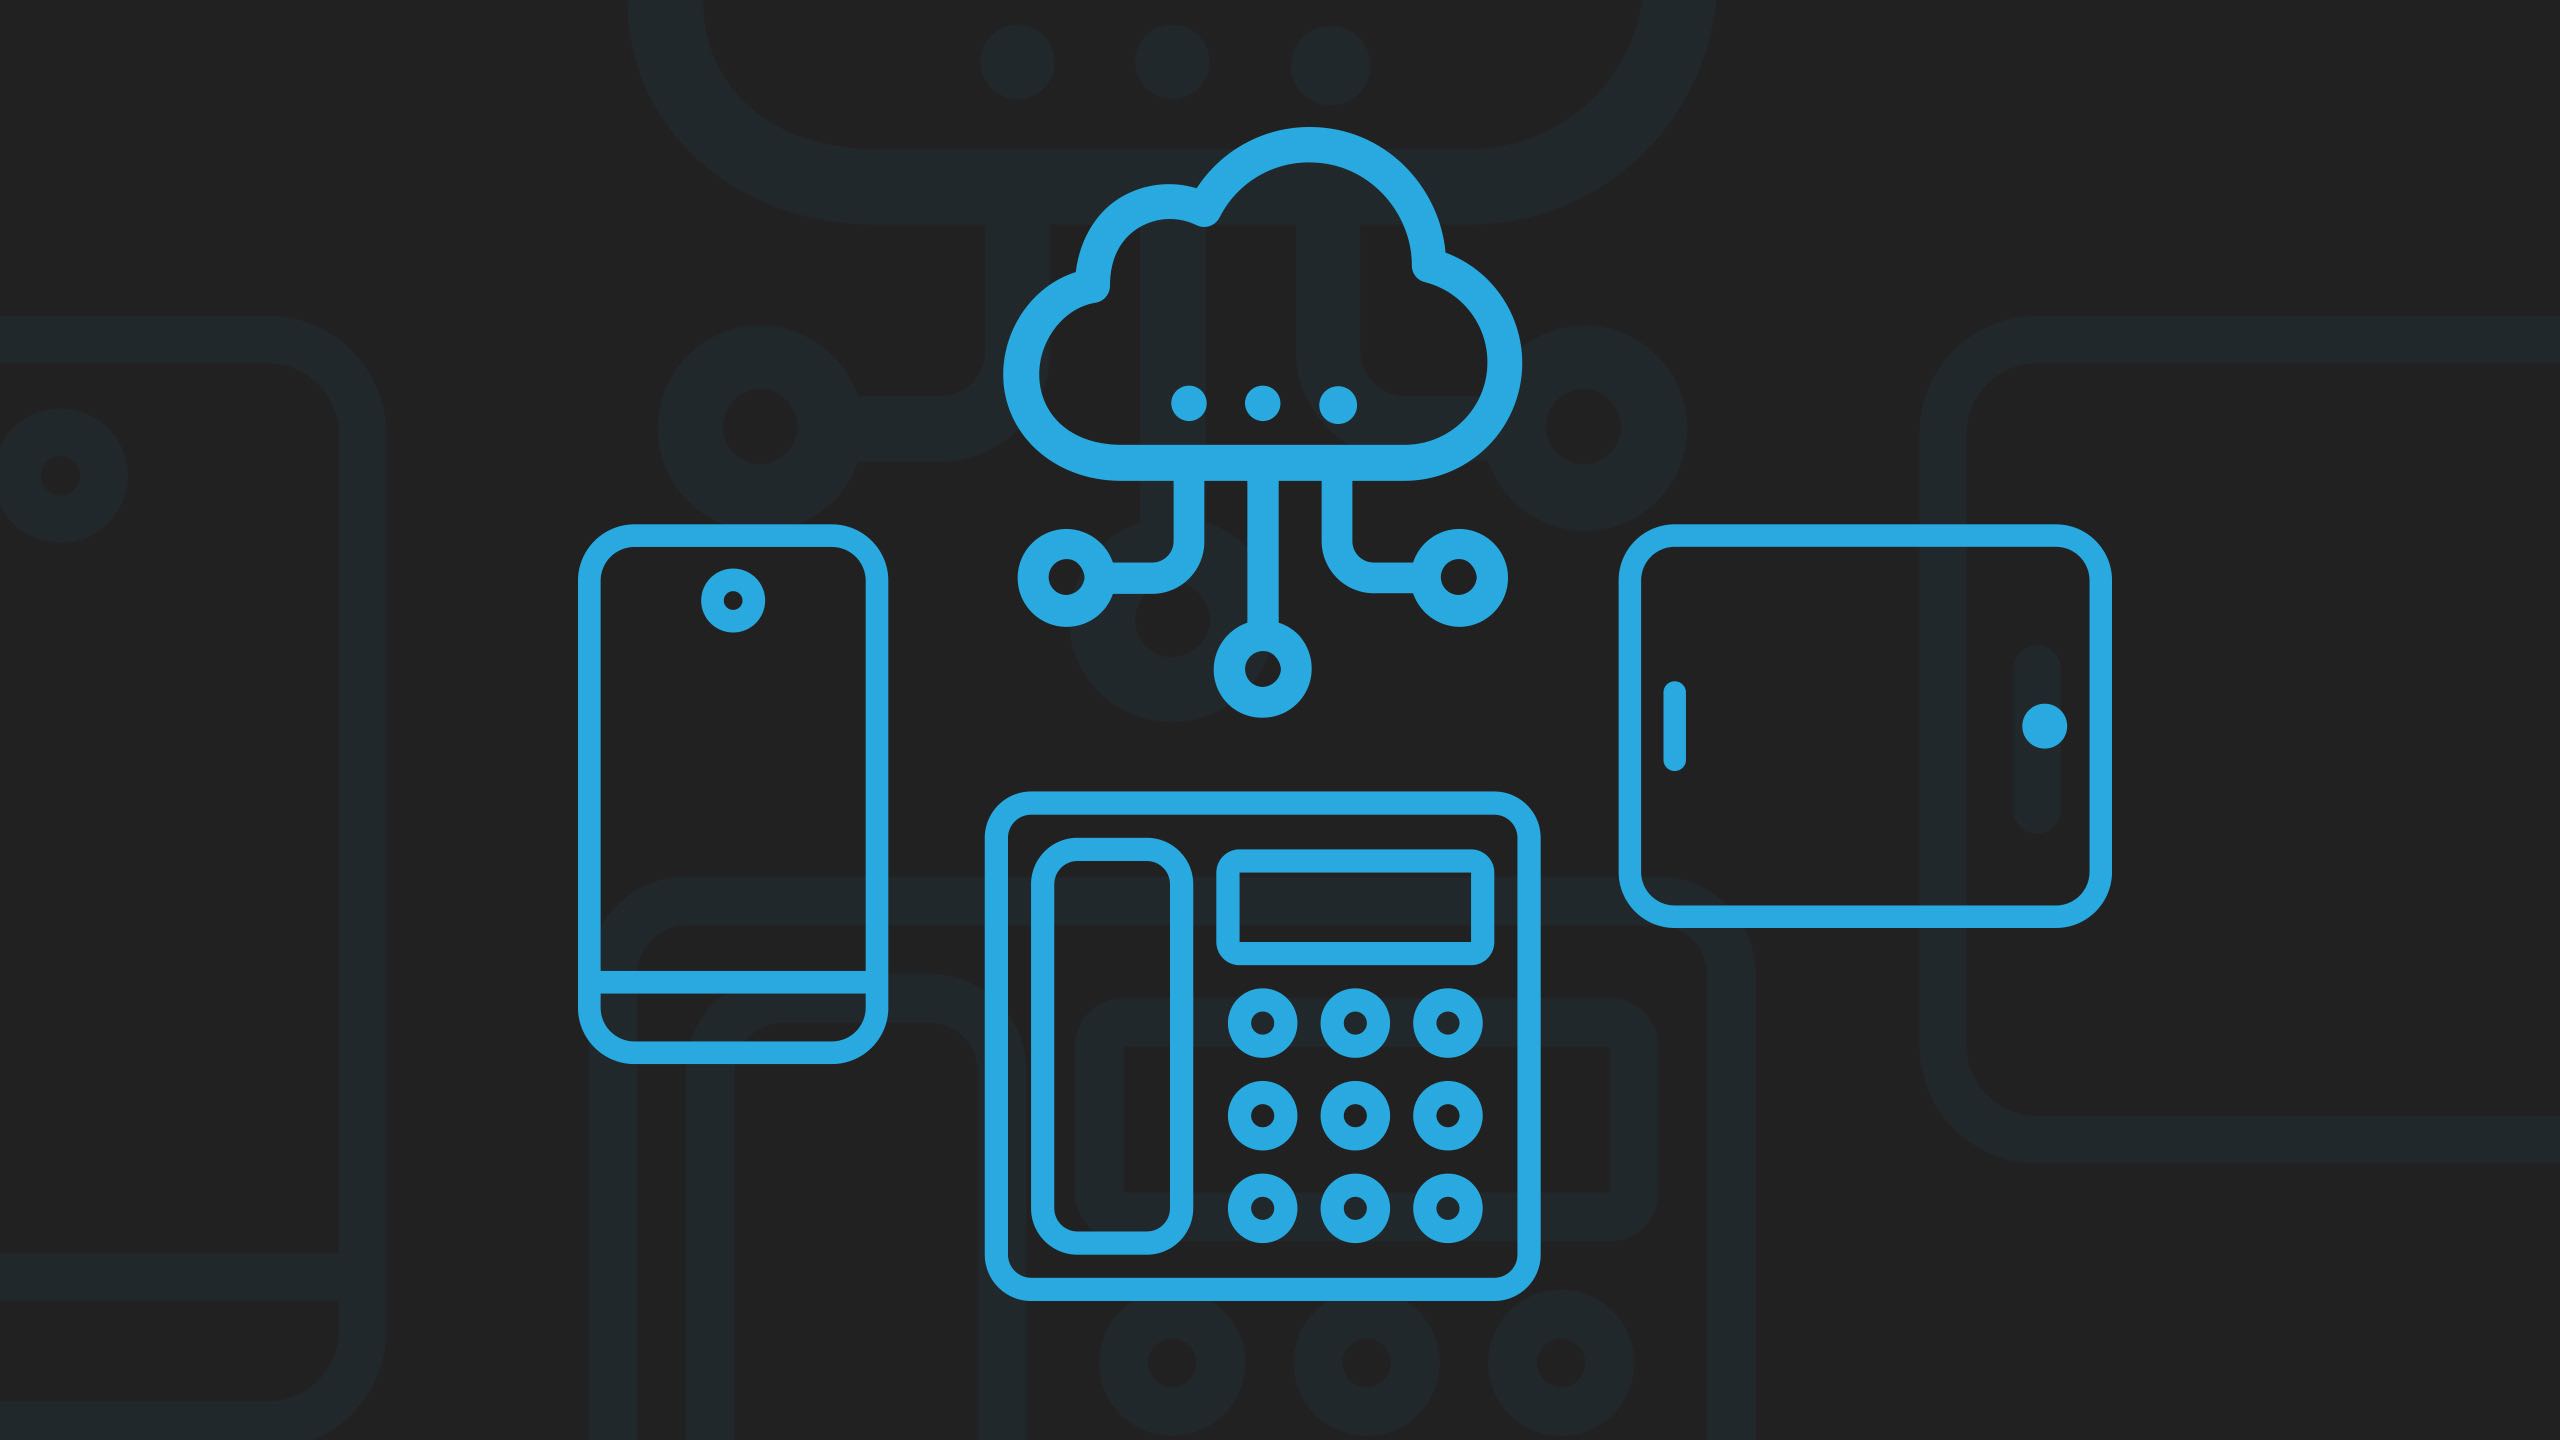 Illustration of cloud computing with mobile, landlines, and tablets